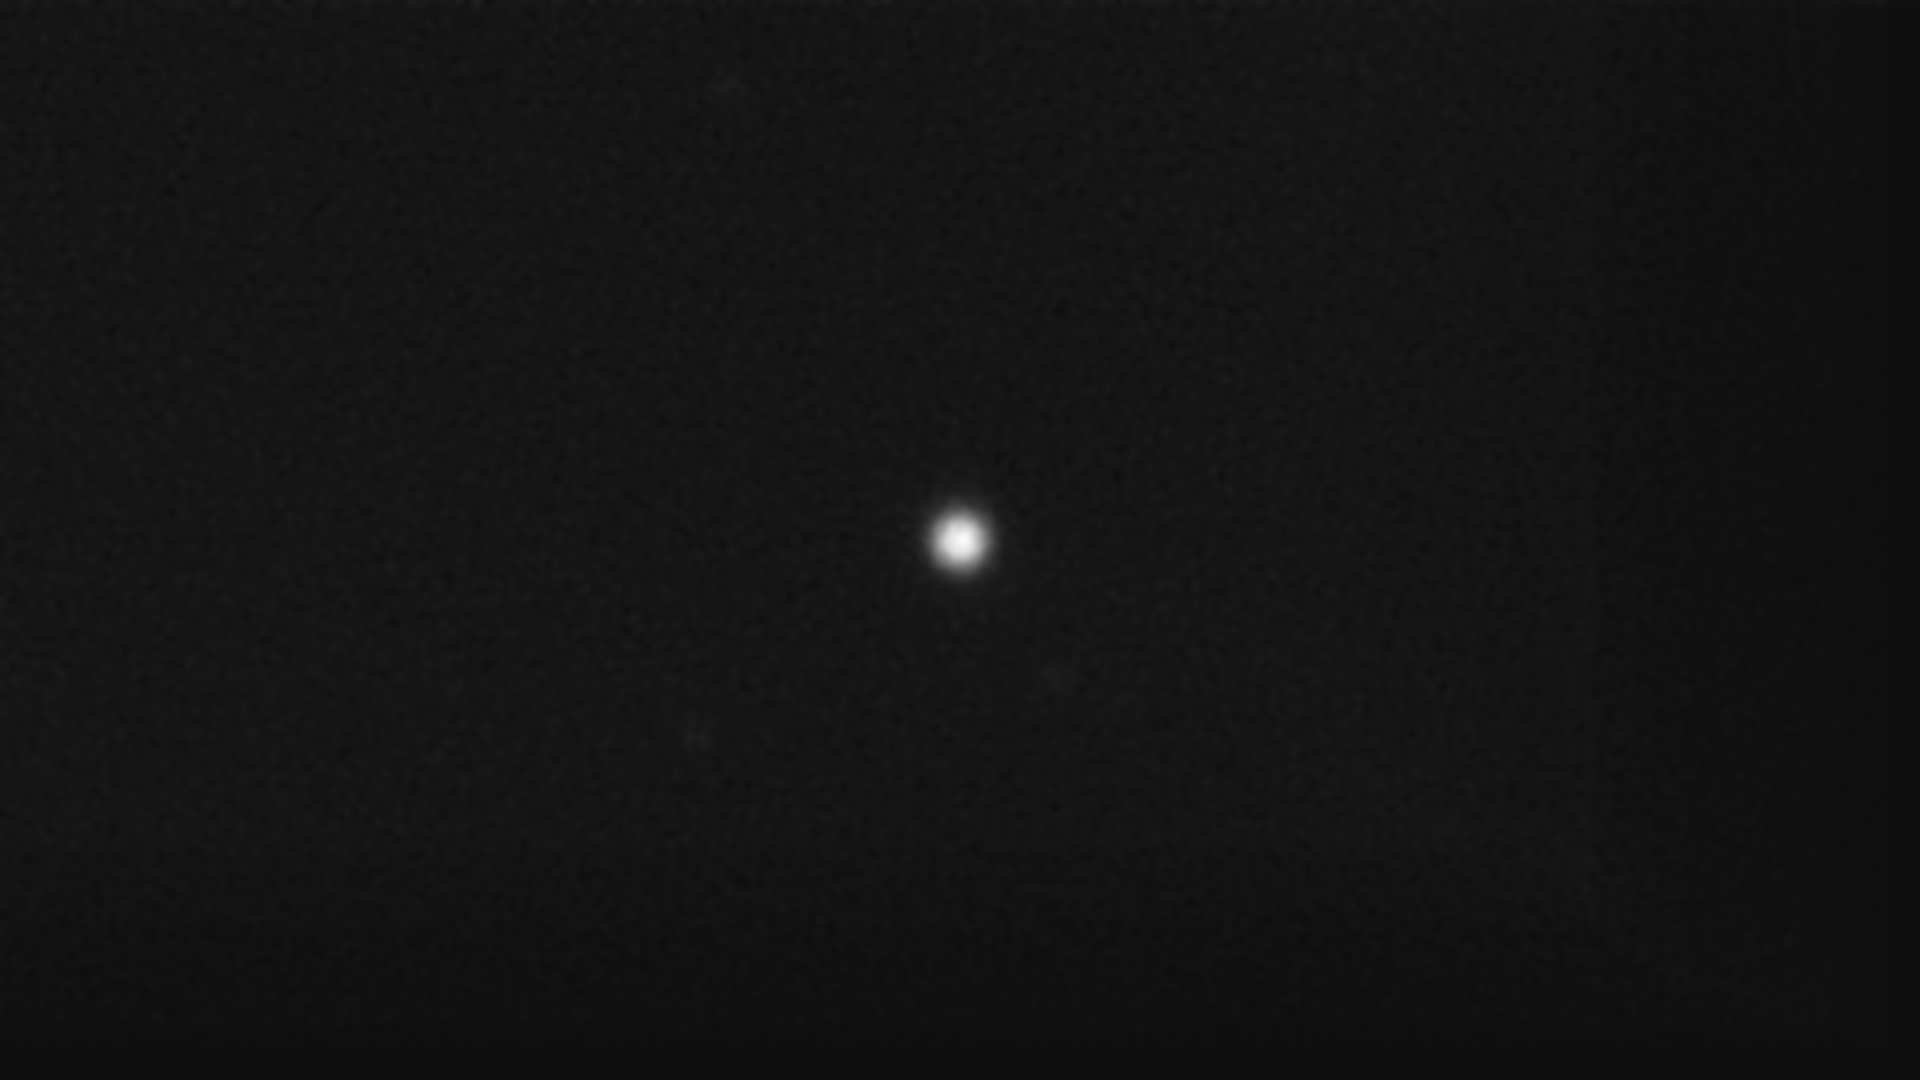 URANUS-CH4-11nov--11-11-2022-1h20TU.png.e2e59c043ad9f27de2ce0bbef28f241d.png